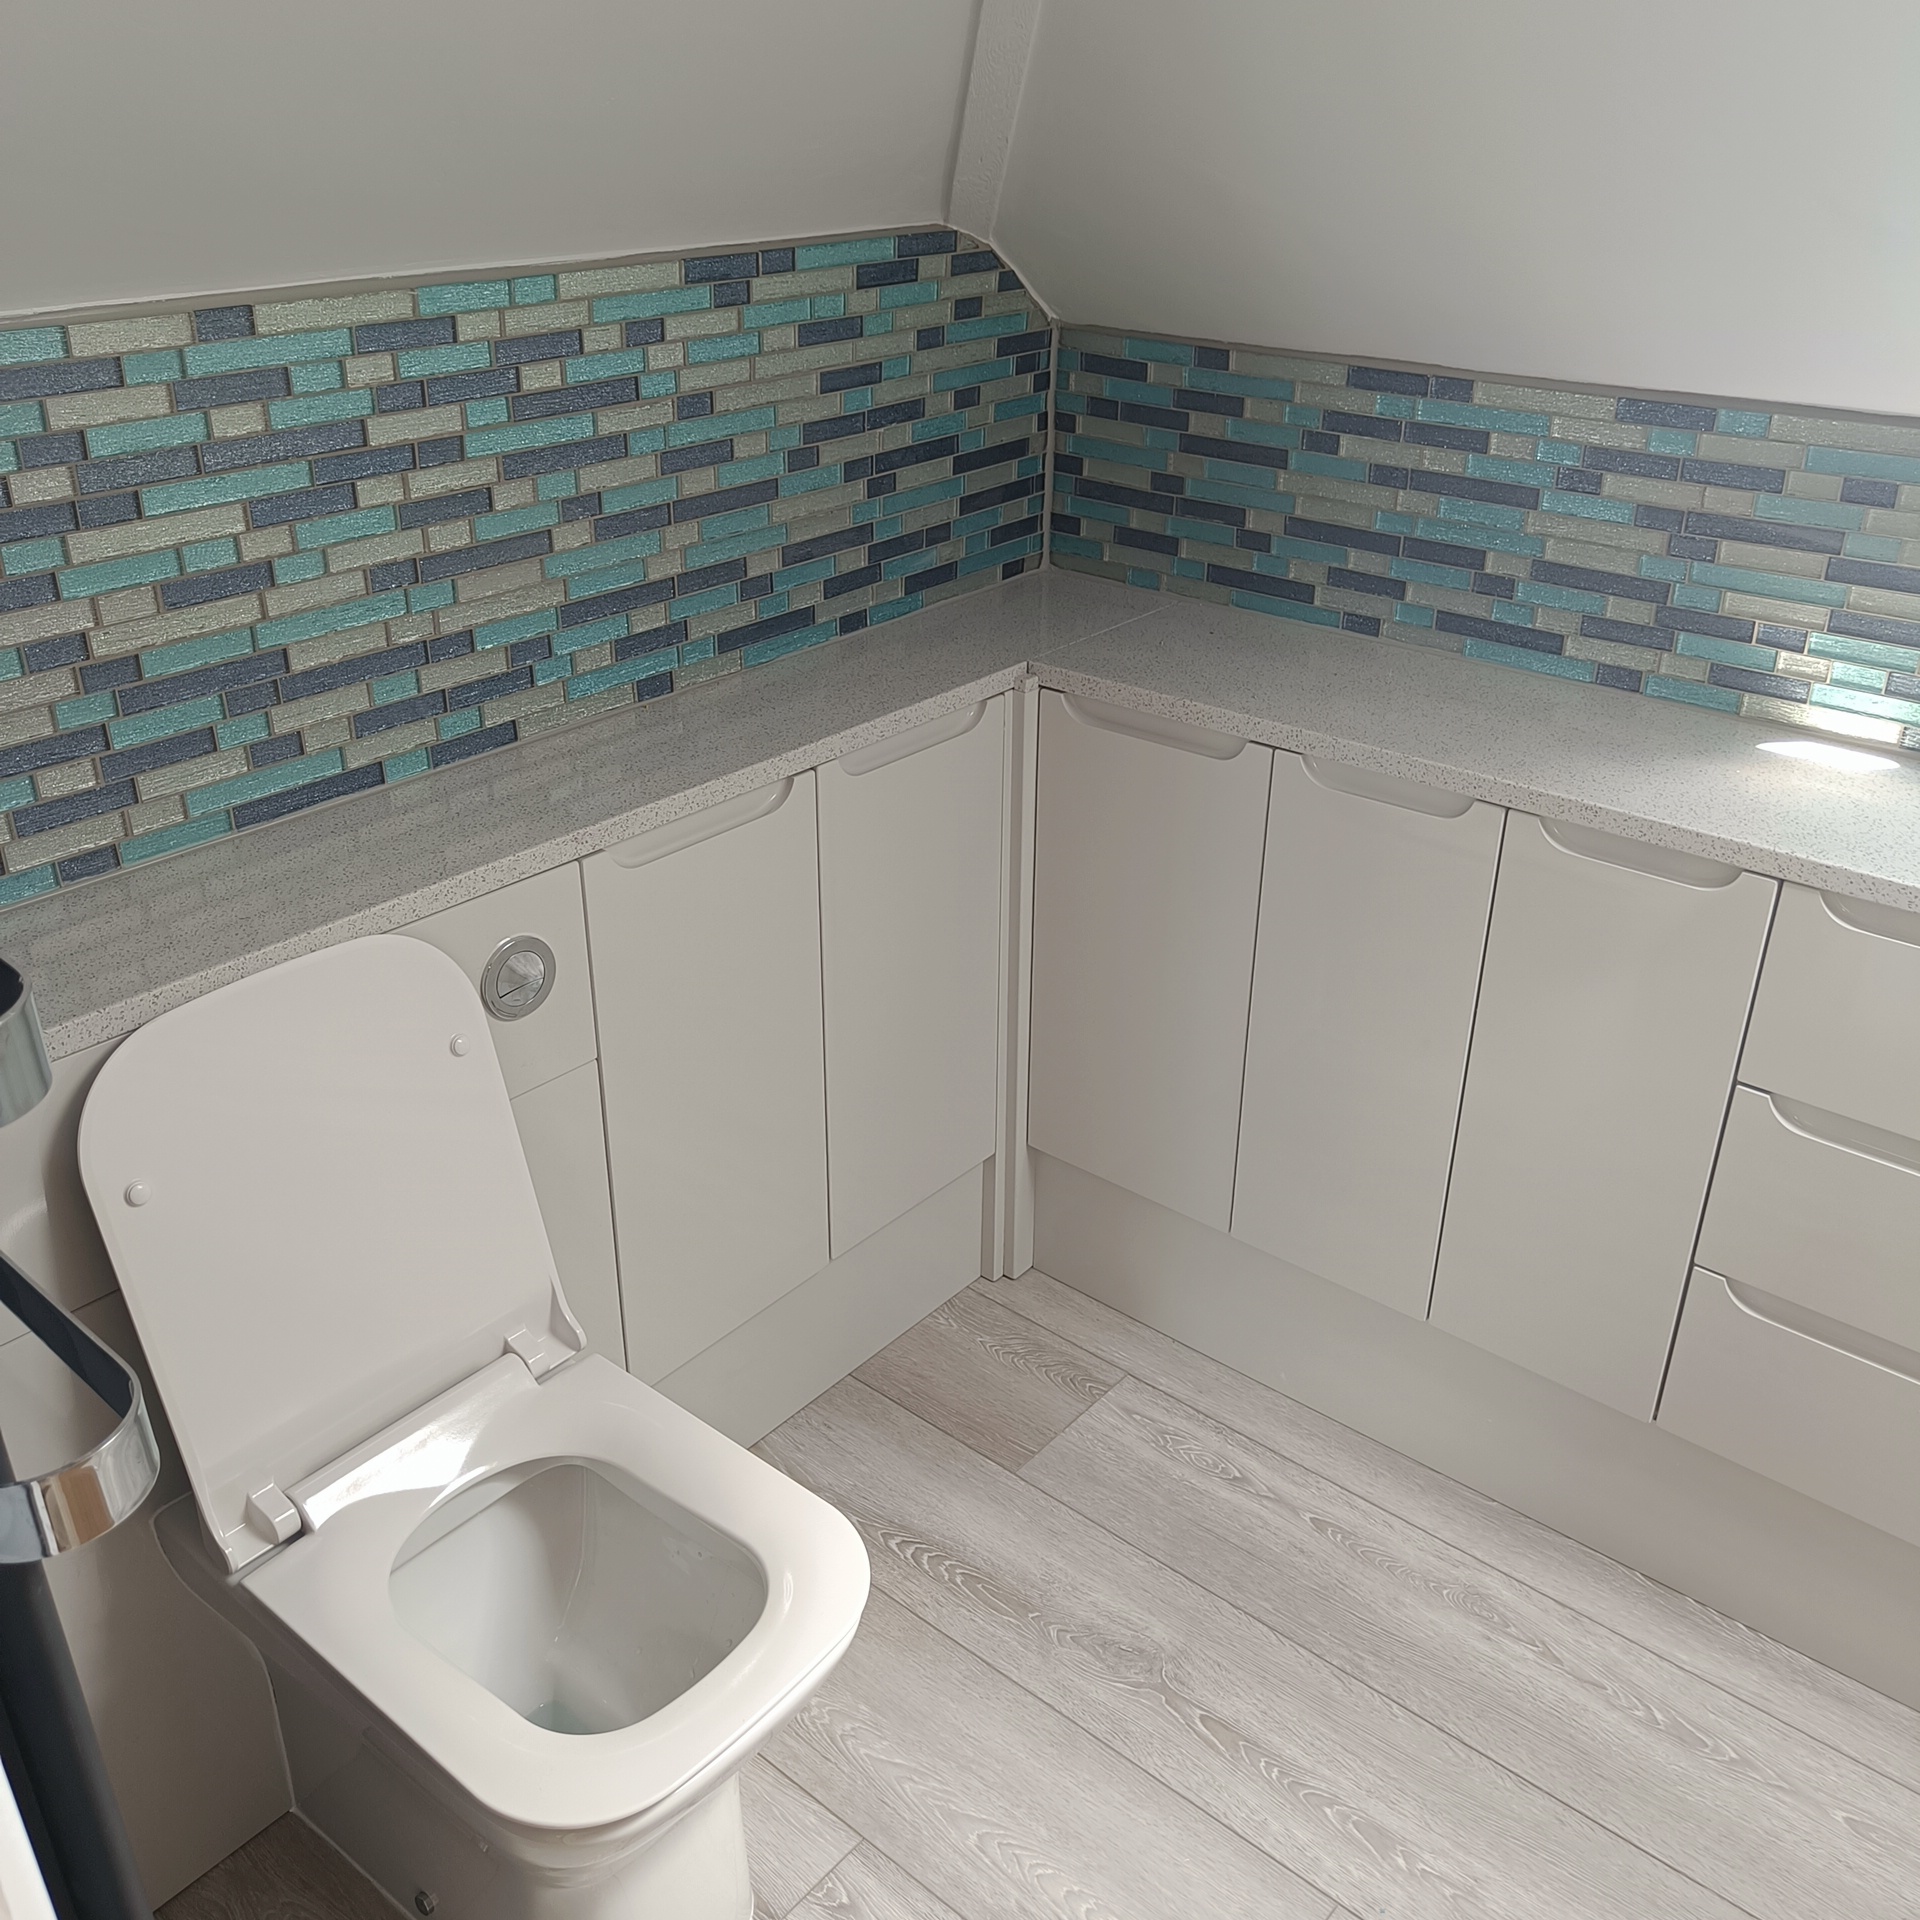 Bathroom with vanity units and mosaic tiles